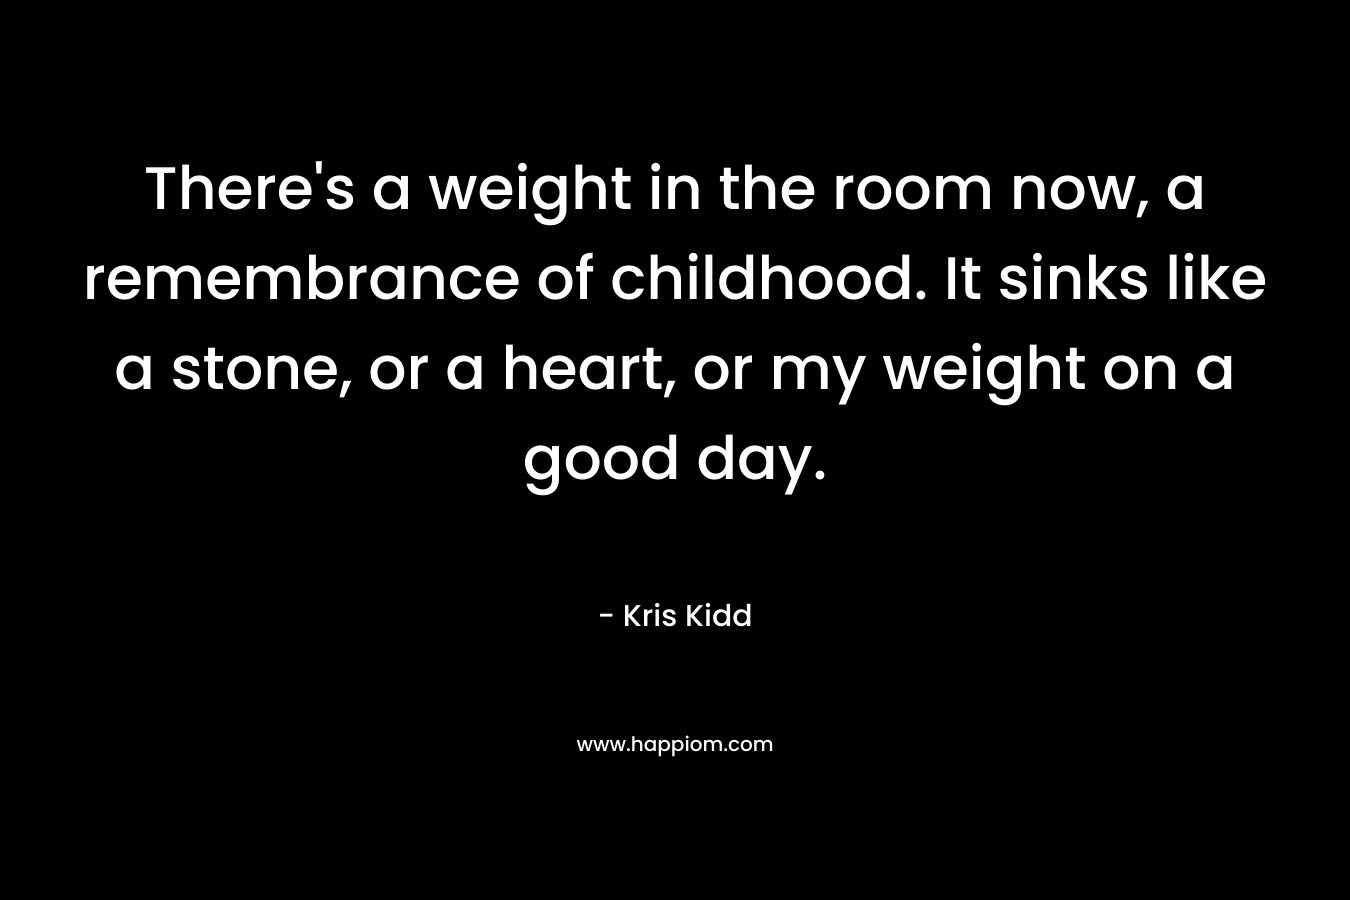 There’s a weight in the room now, a remembrance of childhood. It sinks like a stone, or a heart, or my weight on a good day. – Kris Kidd